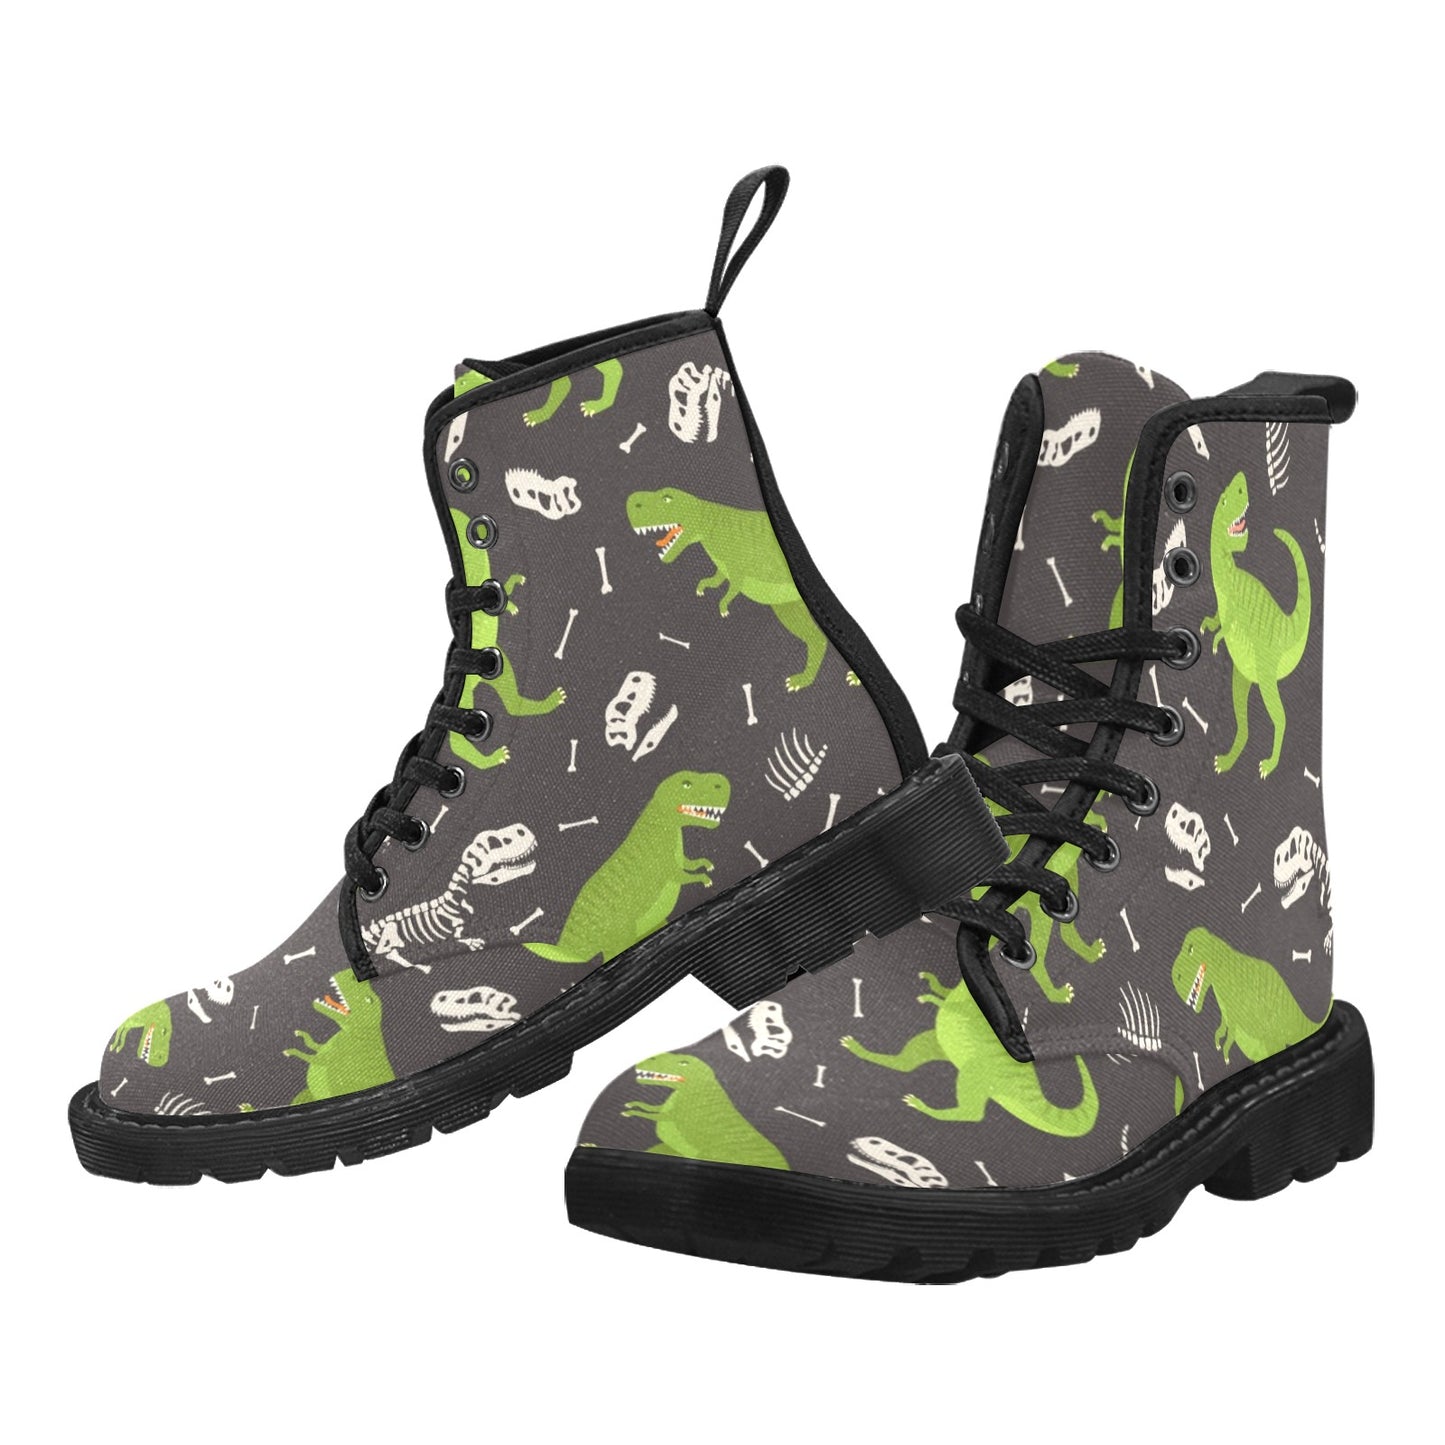 Dinosaur Men Boots, Skeleton Dino Fossil Design Pattern Vegan Canvas Festival Party Lace Up Shoes Fashion Print Combat Casual Custom Gift